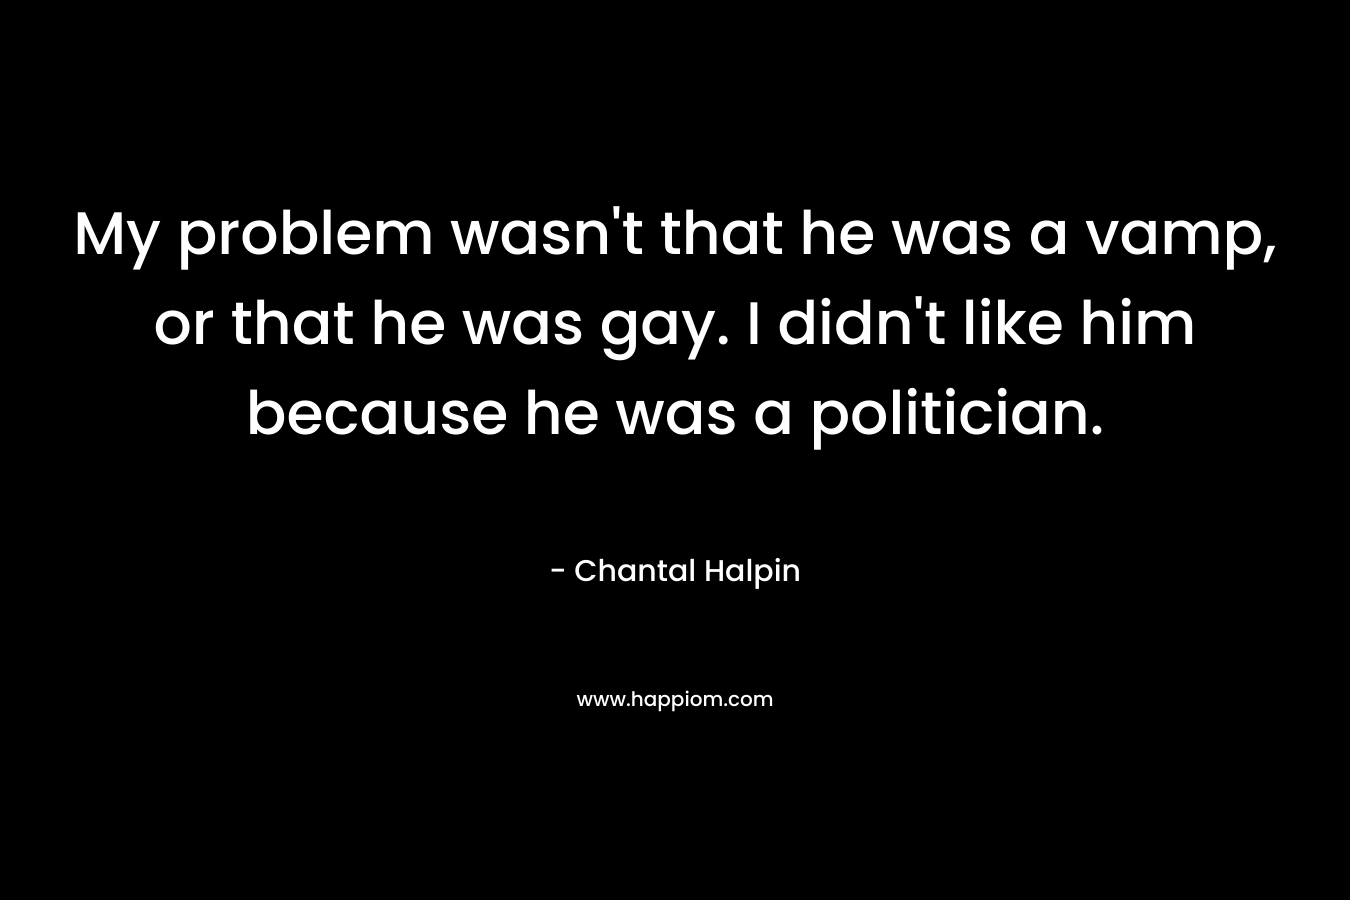 My problem wasn't that he was a vamp, or that he was gay. I didn't like him because he was a politician.